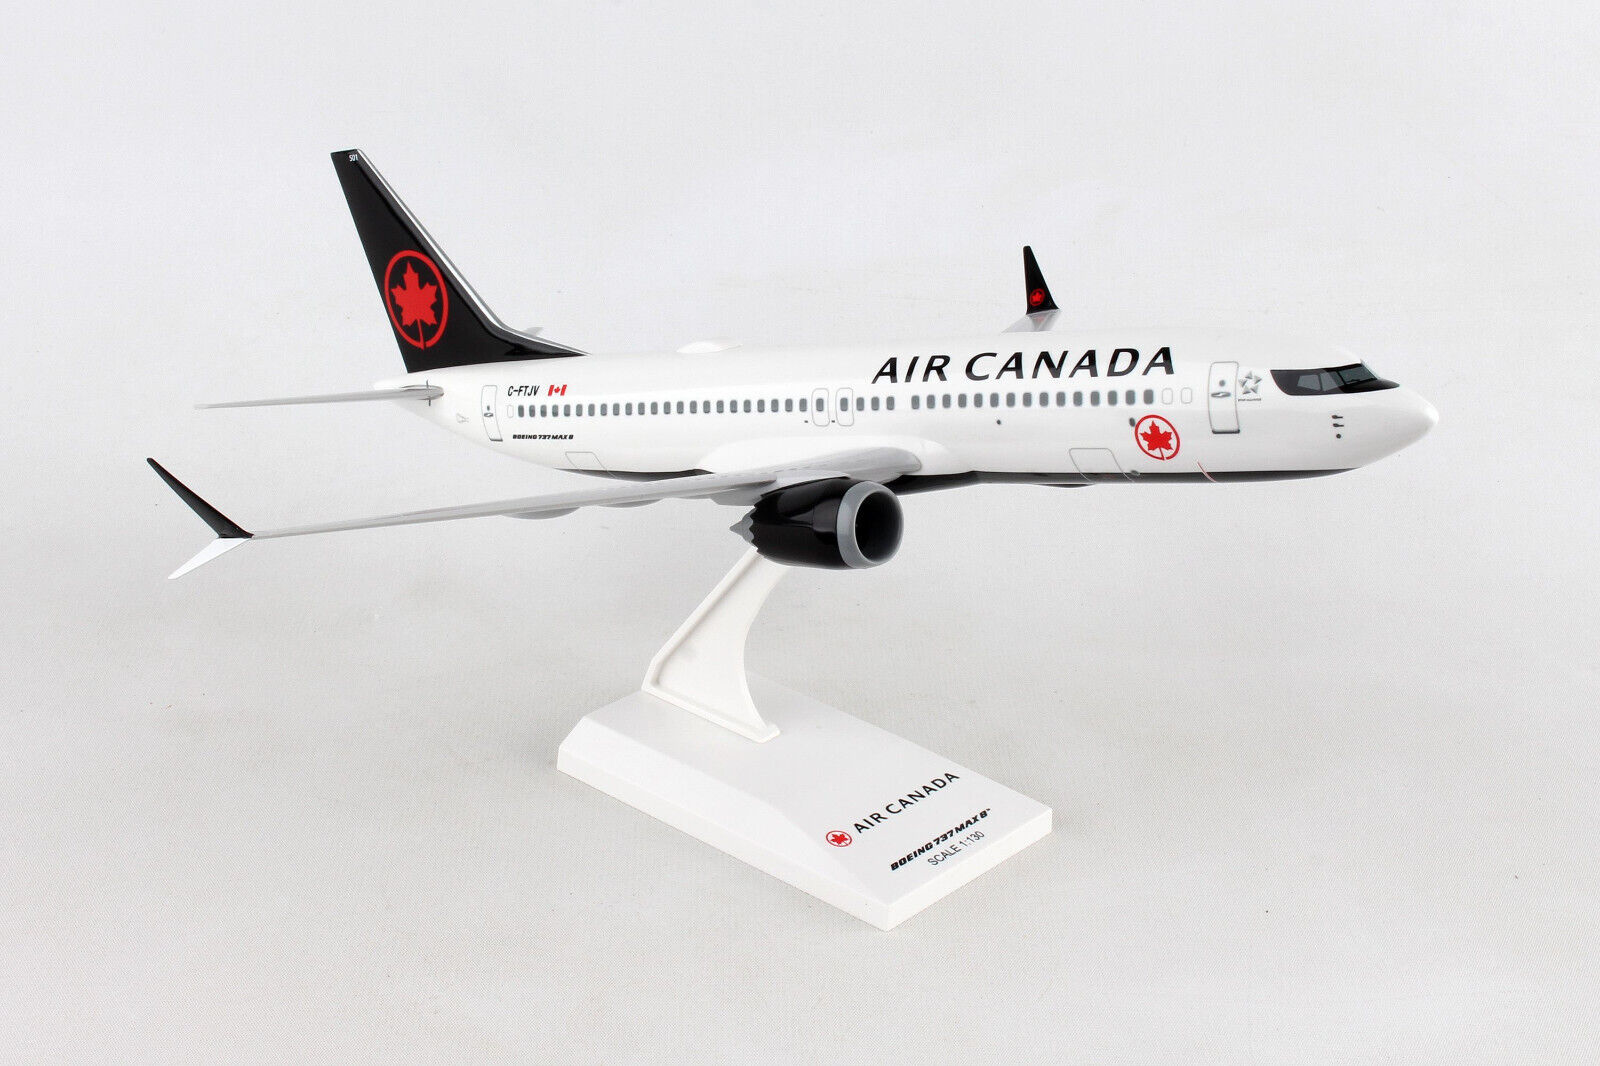 Skymarks Air Canada Airlines Boeing 737Max8 Aircraft Model 1:130 Scale